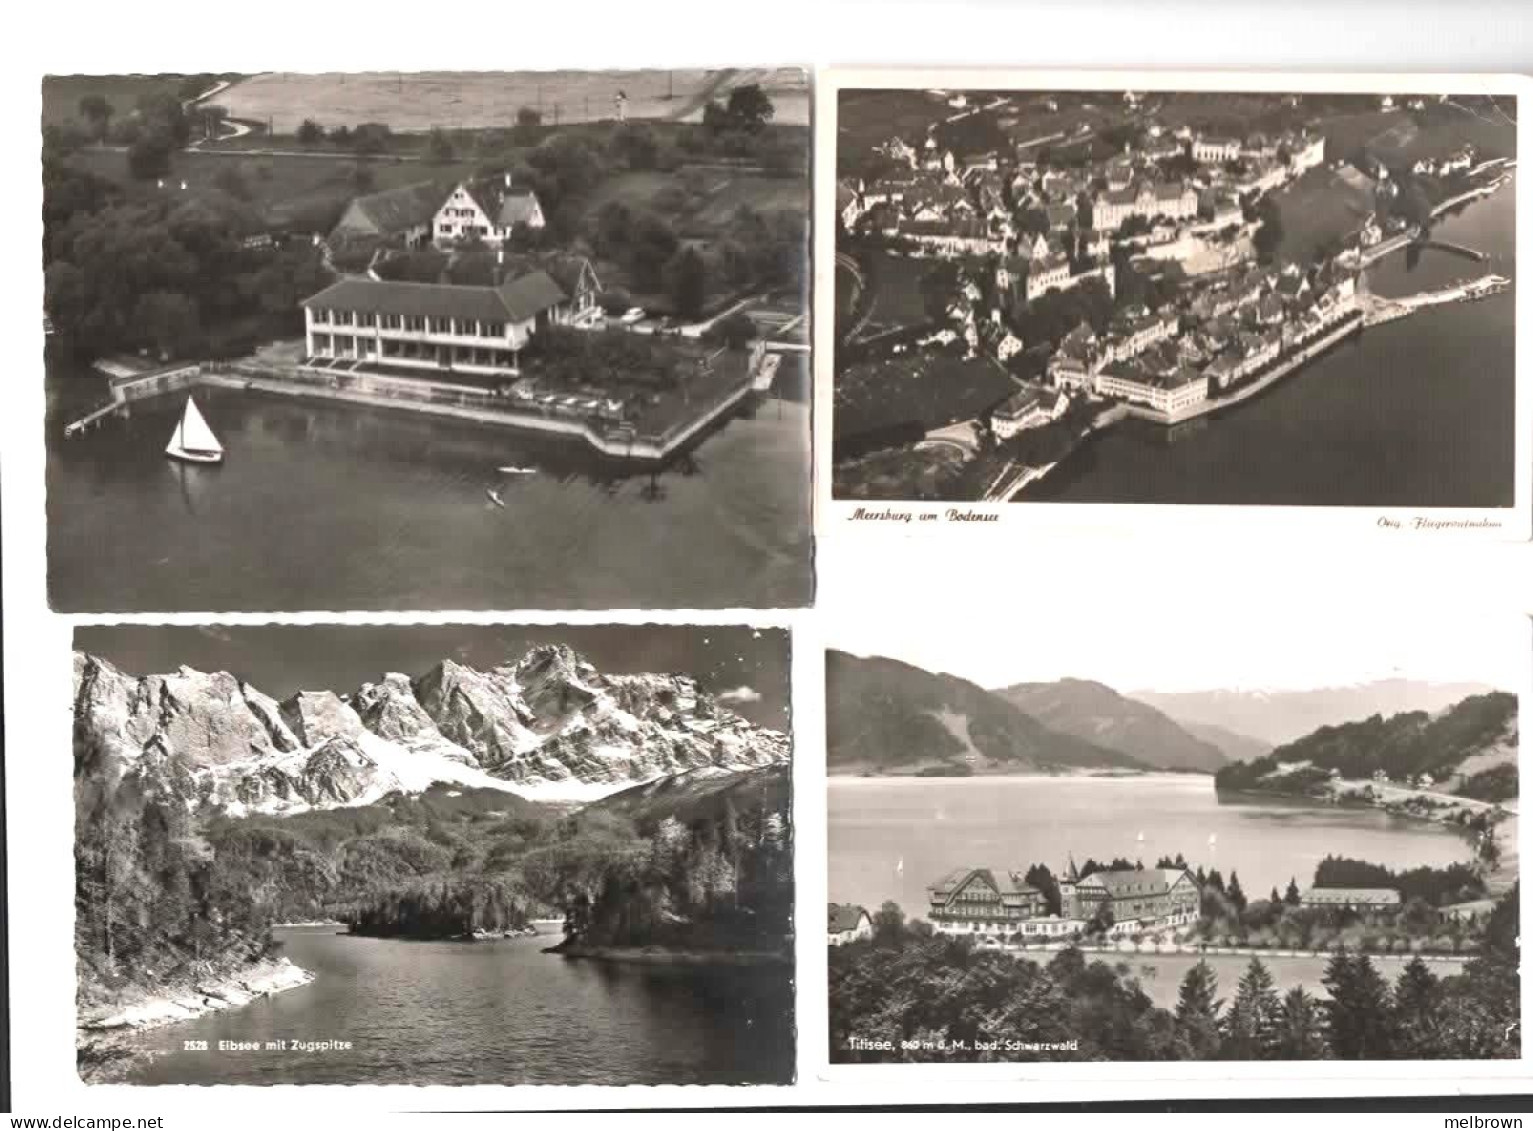 GERMANY 1960s 4 X LAKE SCENES Of Bodensee, Titisee & Eibsee Collectible Postcards - Überlingen